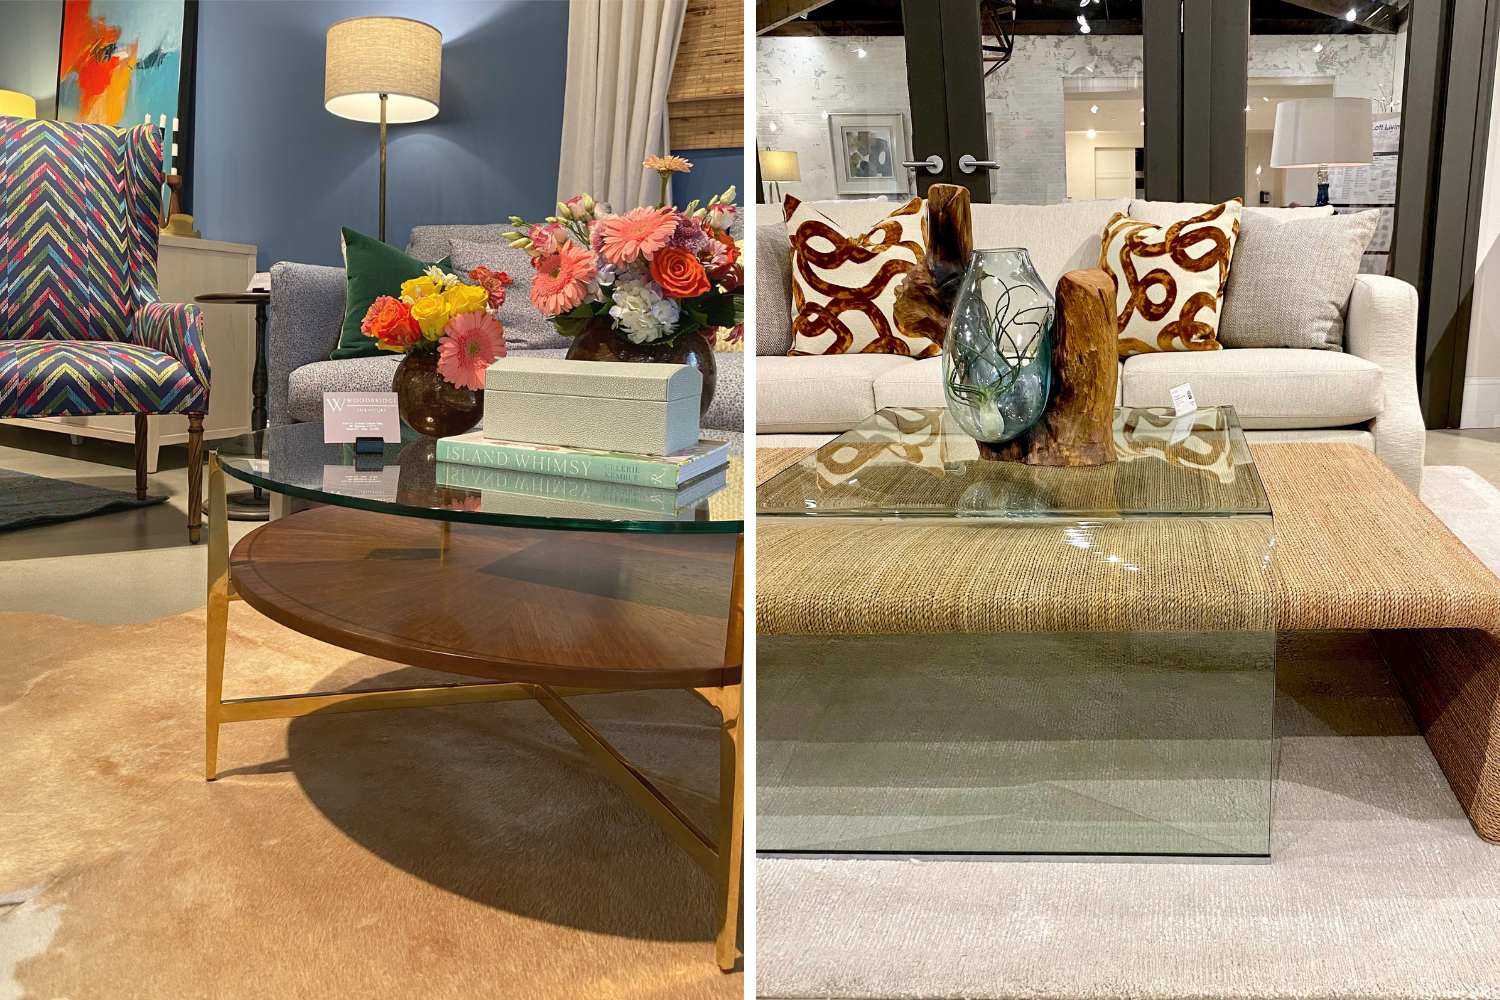 Superior-Construction-Design-High-Point-Market-Textured-Coffee-Table-Organic-Designs-Trends